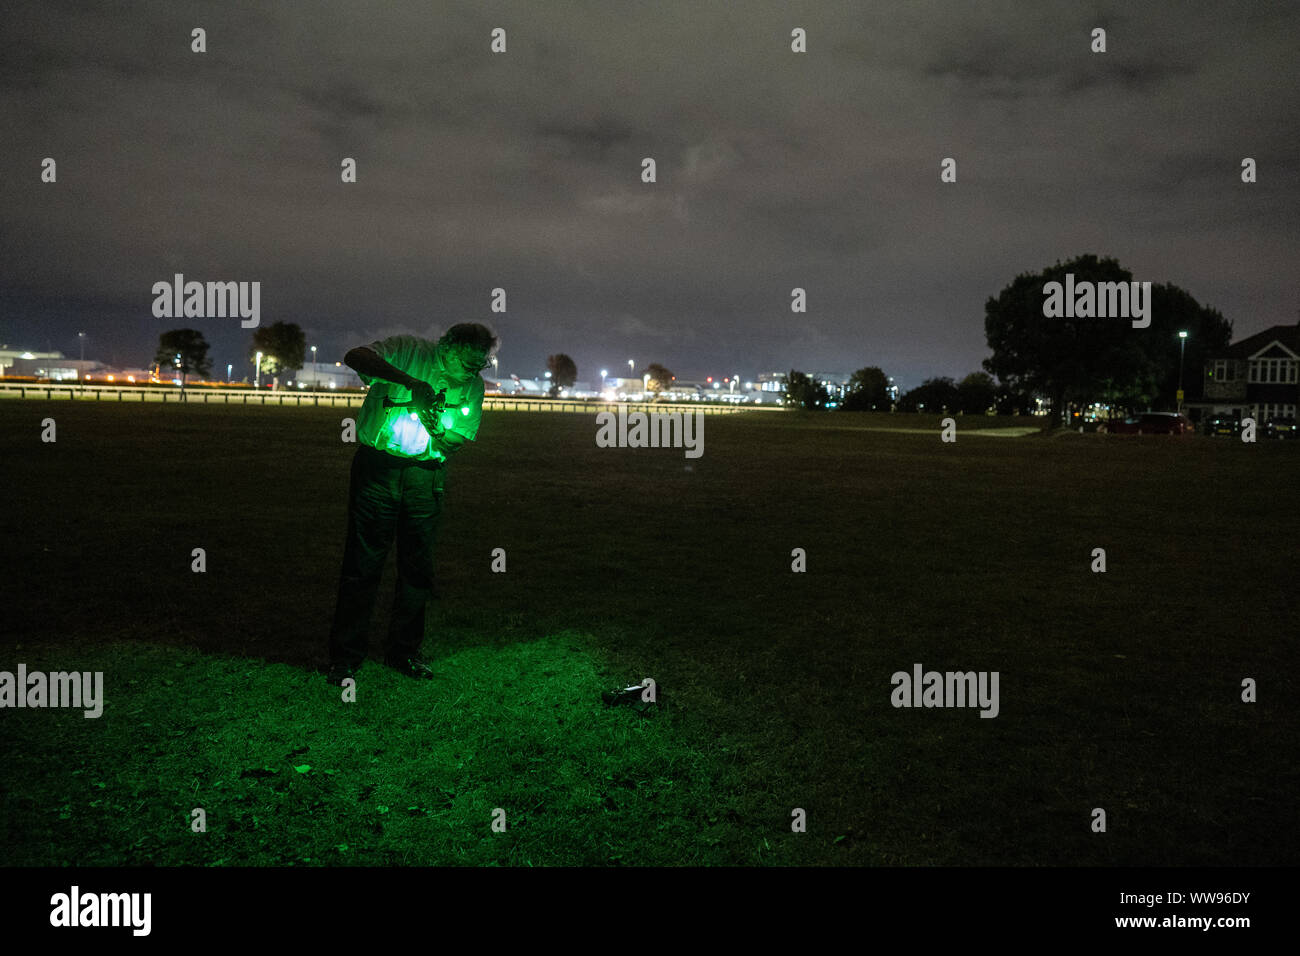 London, UK. 13th Sep, 2019. A man is seen preparing to fly a drone next to Heathrow Airport as a way of closing the airport.Heathrow Pause protesters are seen attempting to fly drones next to Heathrow Airport. Police were called by the protesters to alert the police about the location of the attacks. The police arrested the protesters and took them to nearby police cells. The drones did not fly more than a few feet and unconfirmed reports suggest that signal jammers were used to ensure that the drones were unable to pose any real threat to the airport. Credit: SOPA Images Limited/Alamy Live Ne Stock Photo